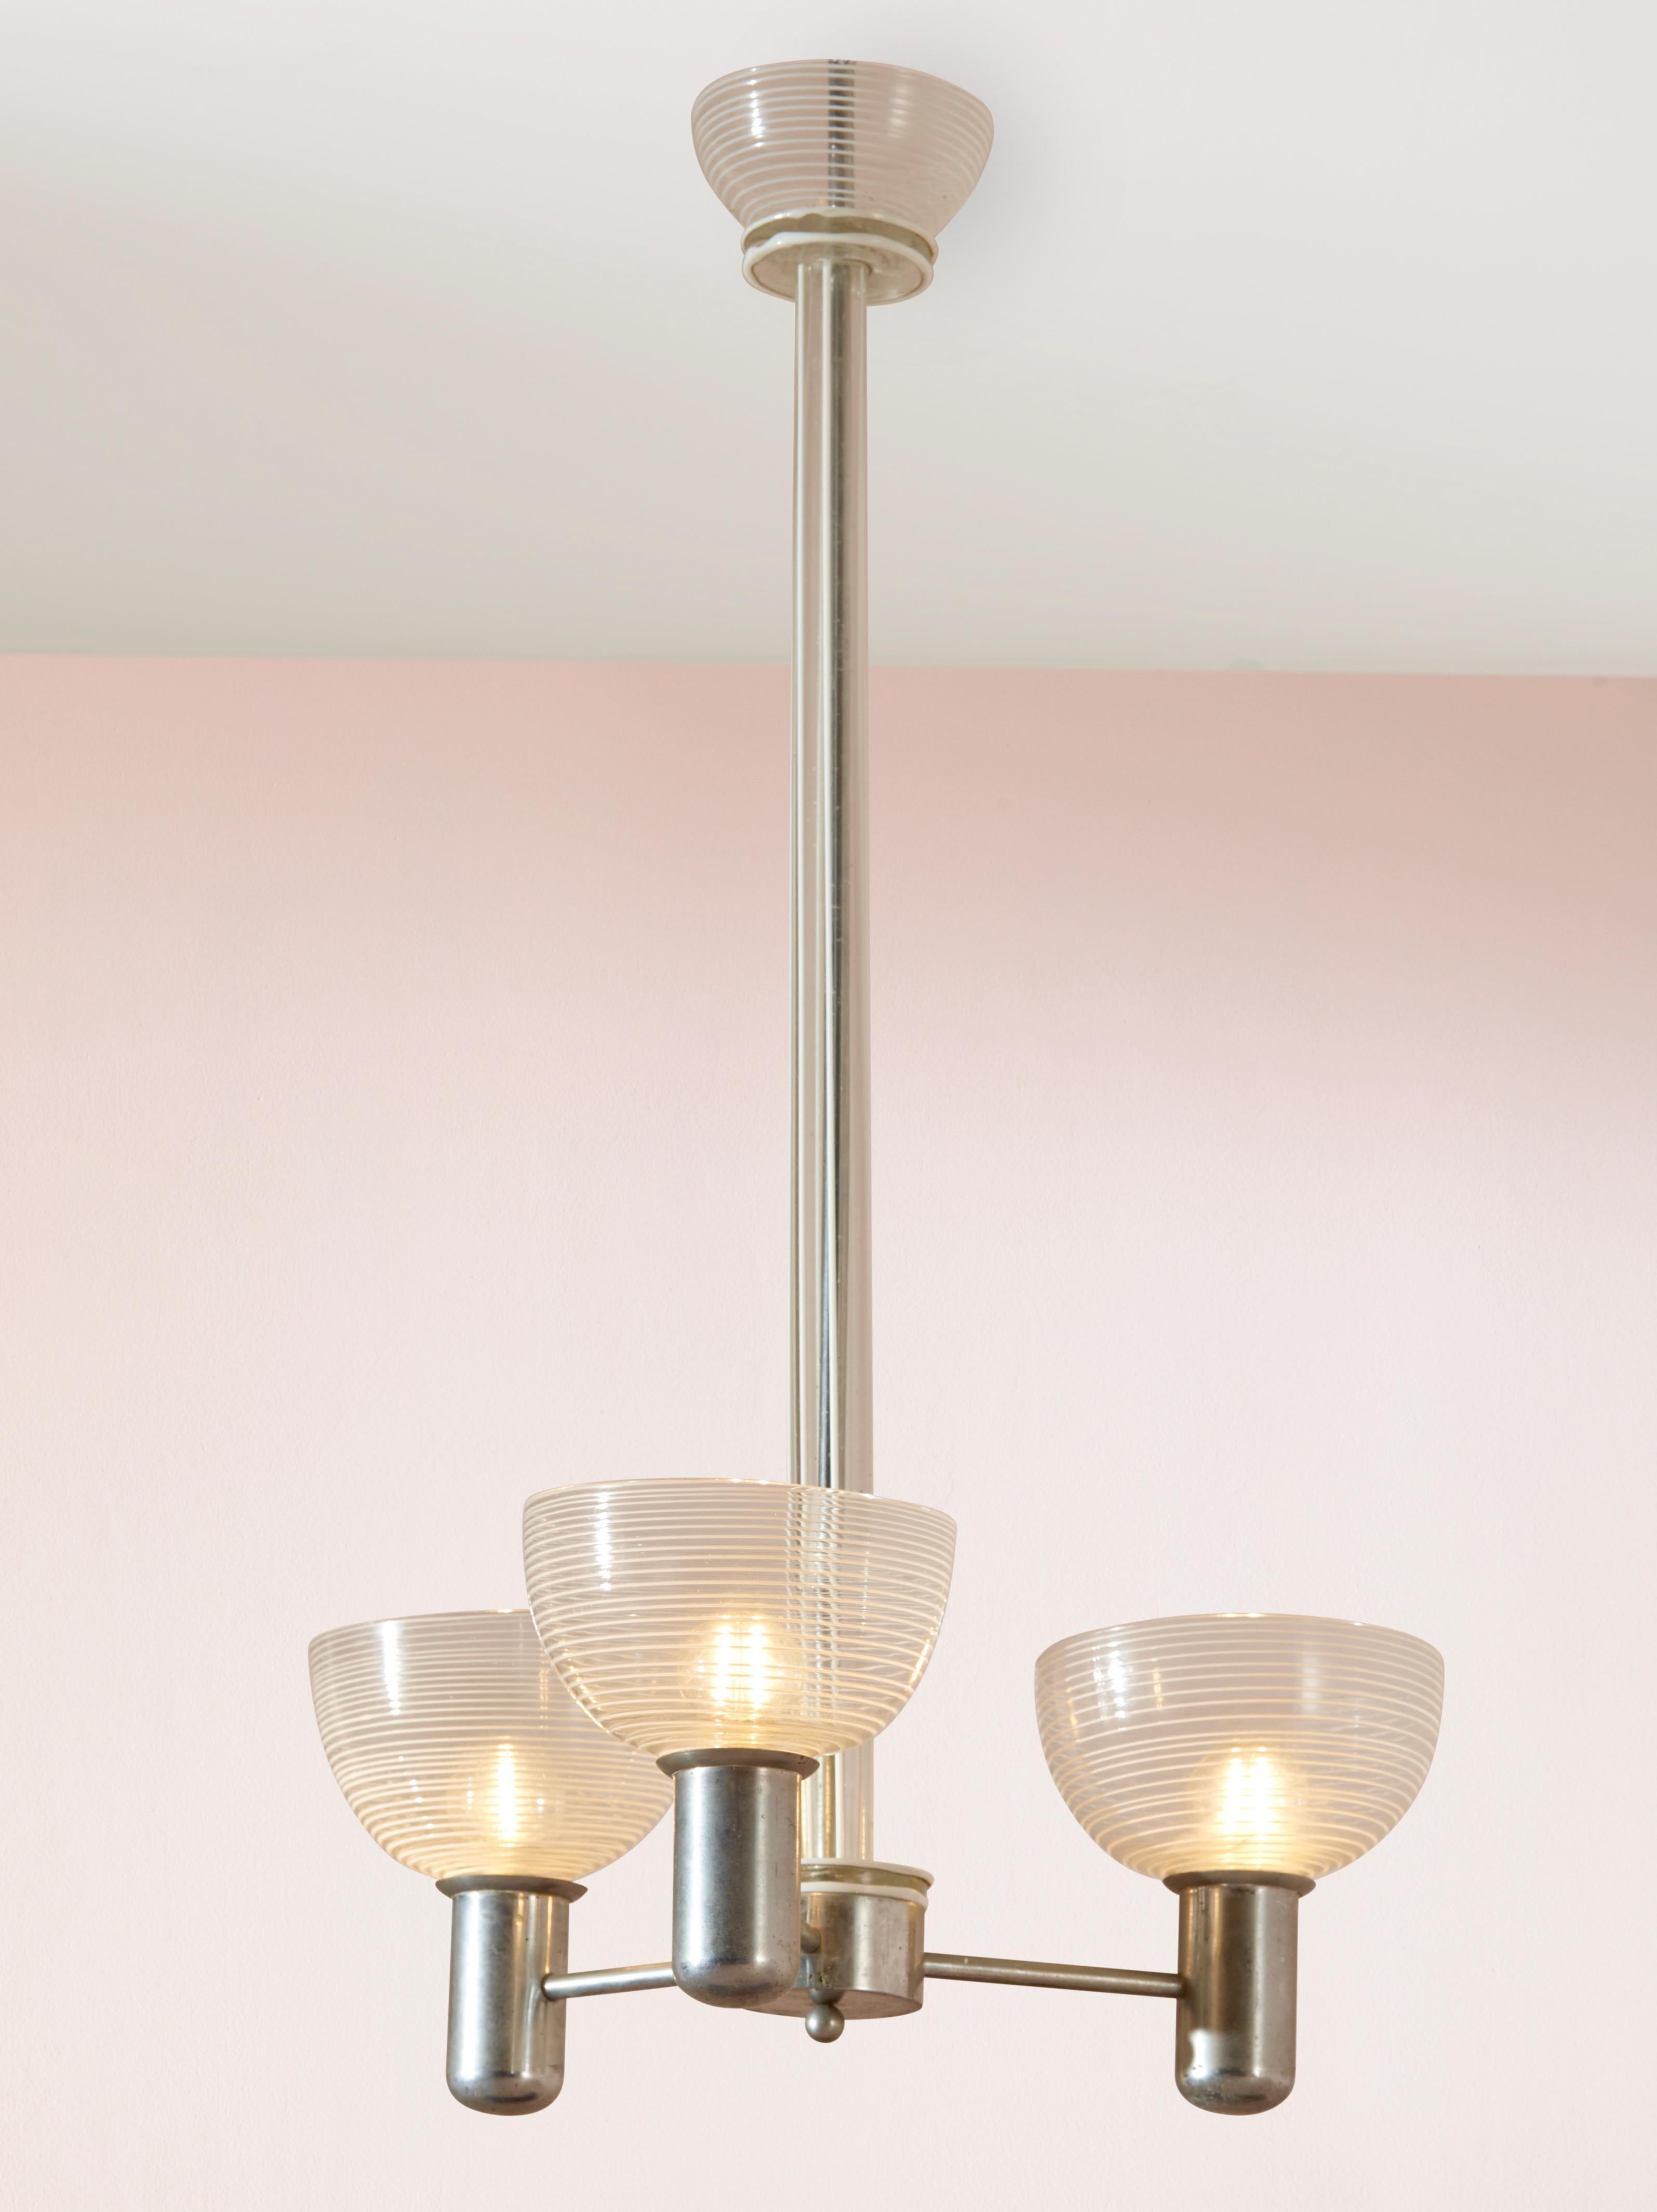 A rare and beautiful rationalist chandelier from the 1930s, crafted with exquisite Murano glass using the filigrana and lattimo techniques. With its metal frame and three arms, this chandelier effortlessly combines functionality and aesthetic